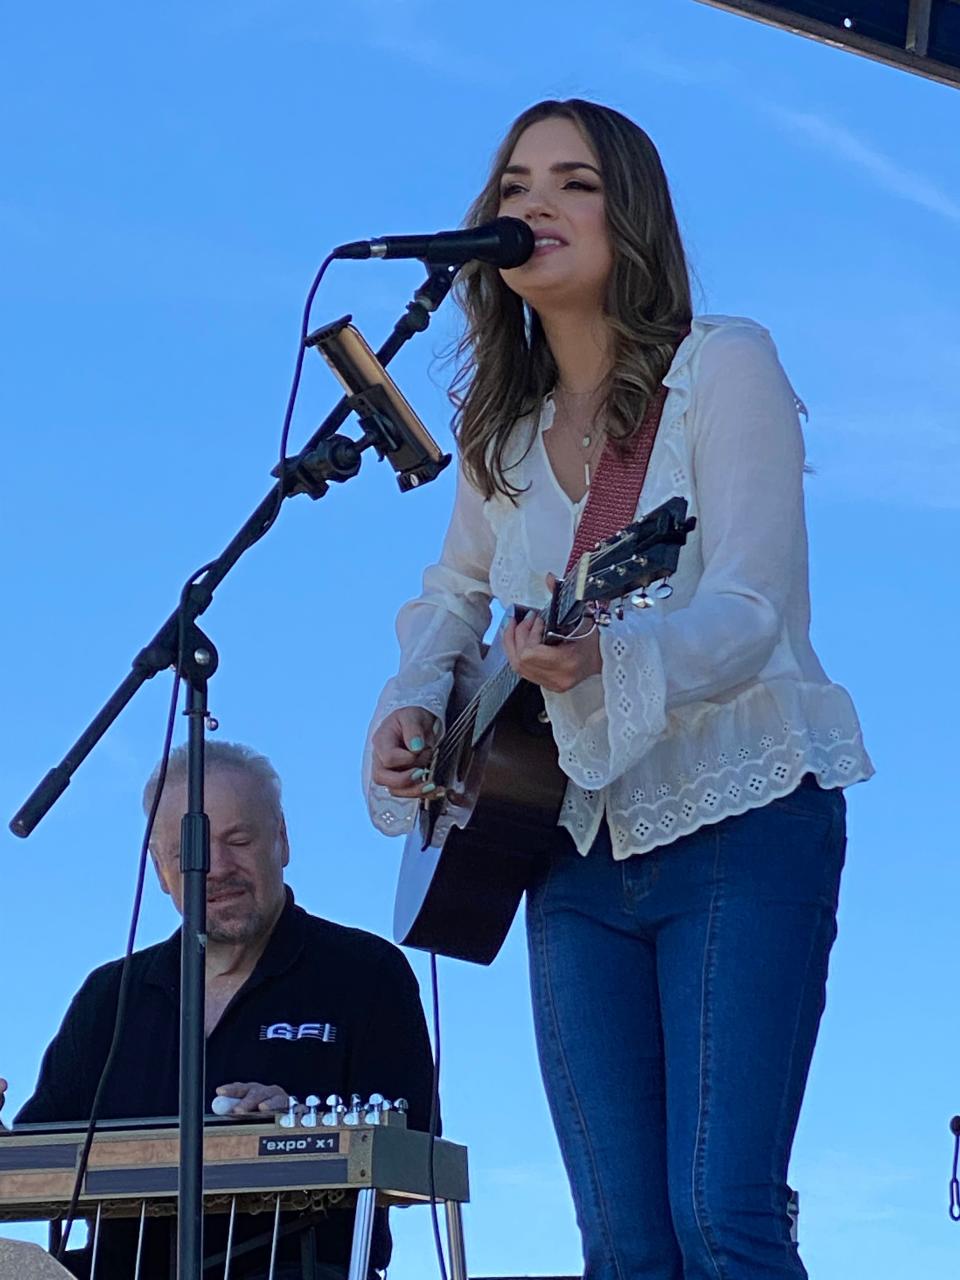 Stark County native Lauren Mascitti is shown performing at the Hartville MarketPlace & Flea Market in October. The former "American Idol" contender has a concert on Saturday night in downtown Canton.